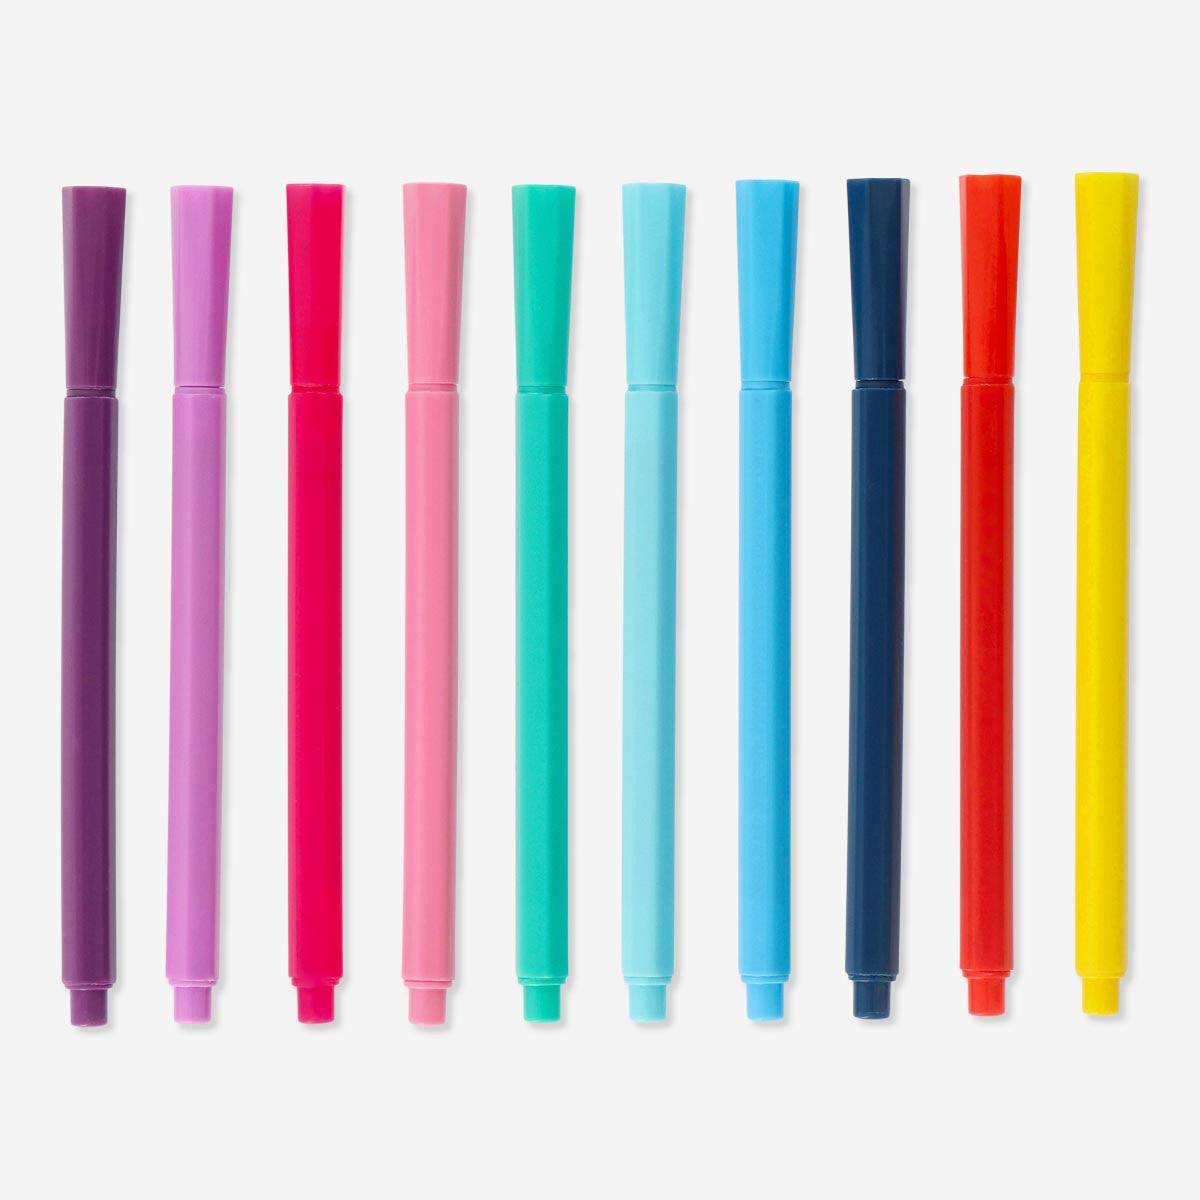 Image of Fineliners. 10 pcs